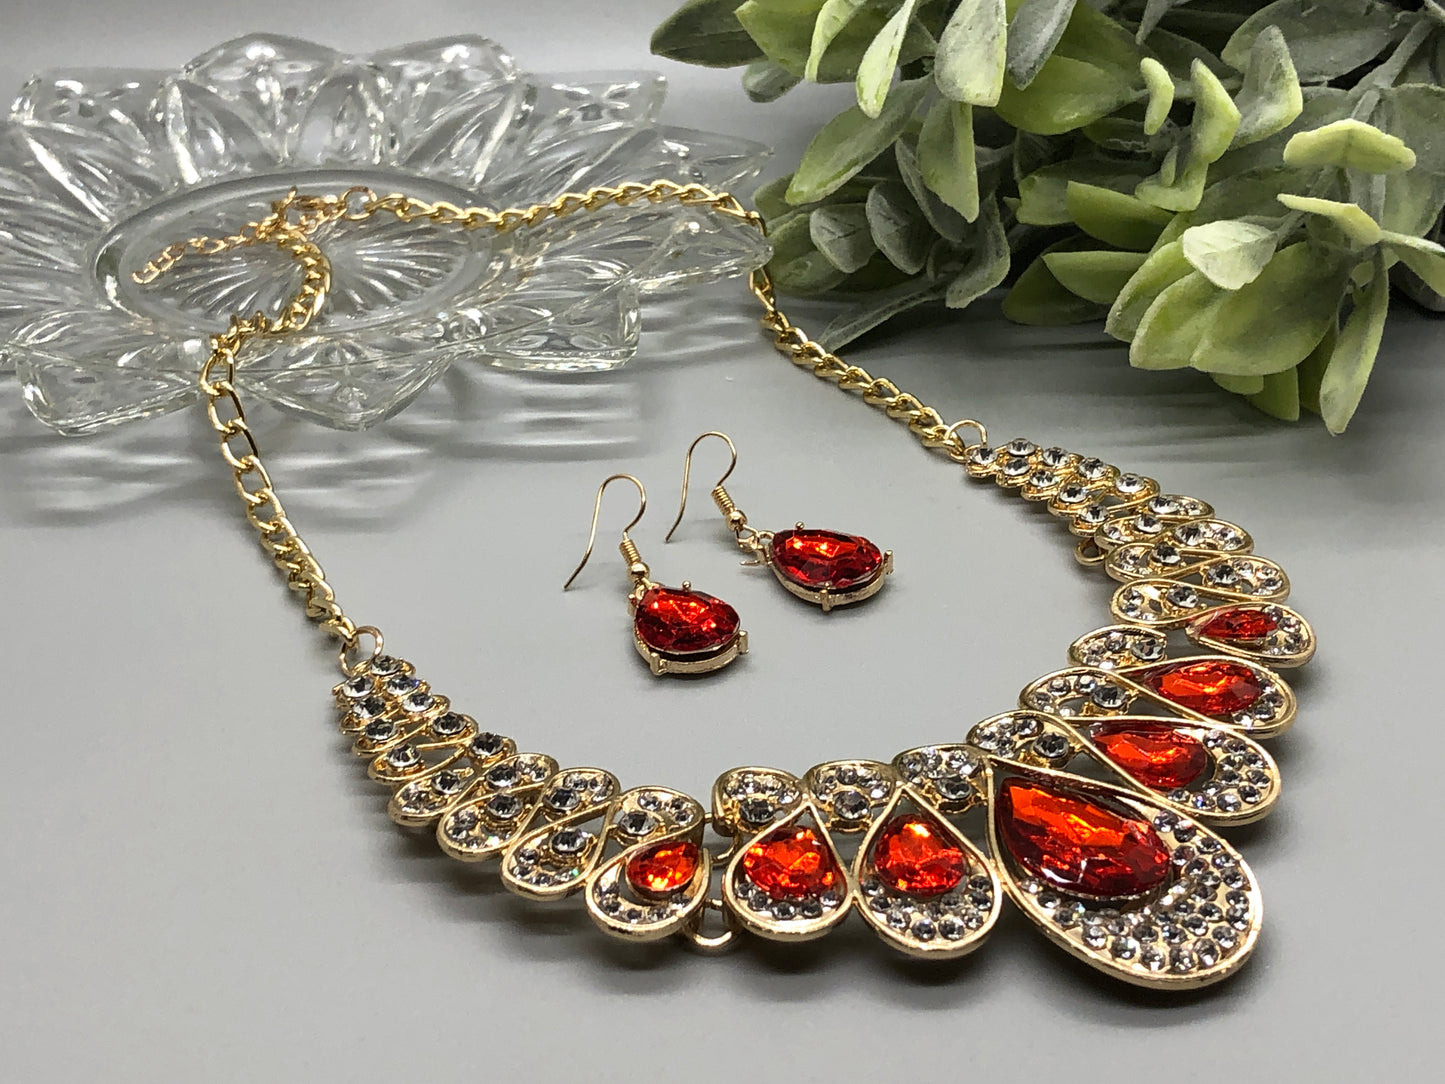 Red Crystal Rhinestone Bridal Necklace Earrings Sets Wedding Formal Shower Party Event Accessories #009